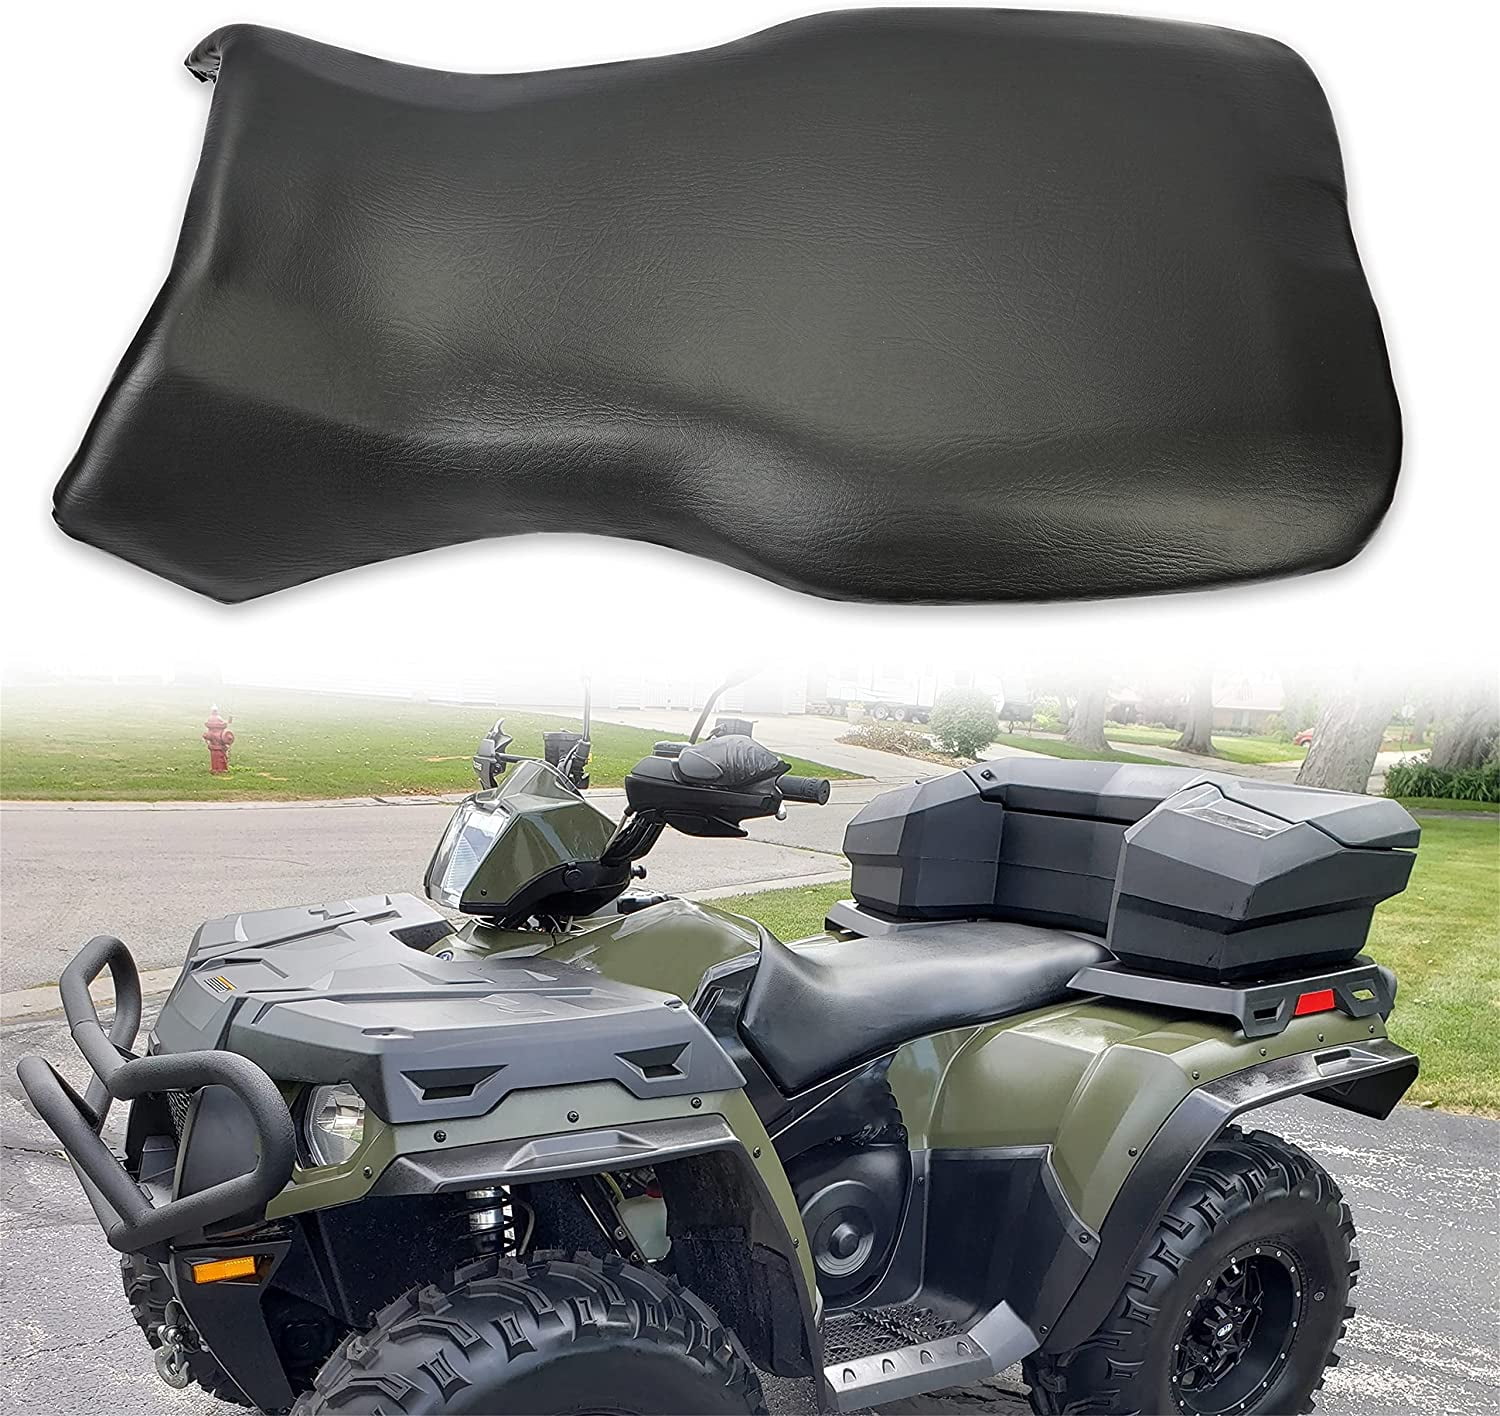 HECASA Seat Replacement Compatible with 2005-2014 Polaris Sportsman 400/450/500/600/700/800 Hawkeye 400 Black Leather Seat Cover Replacement for 2683433-070 2684882-070 